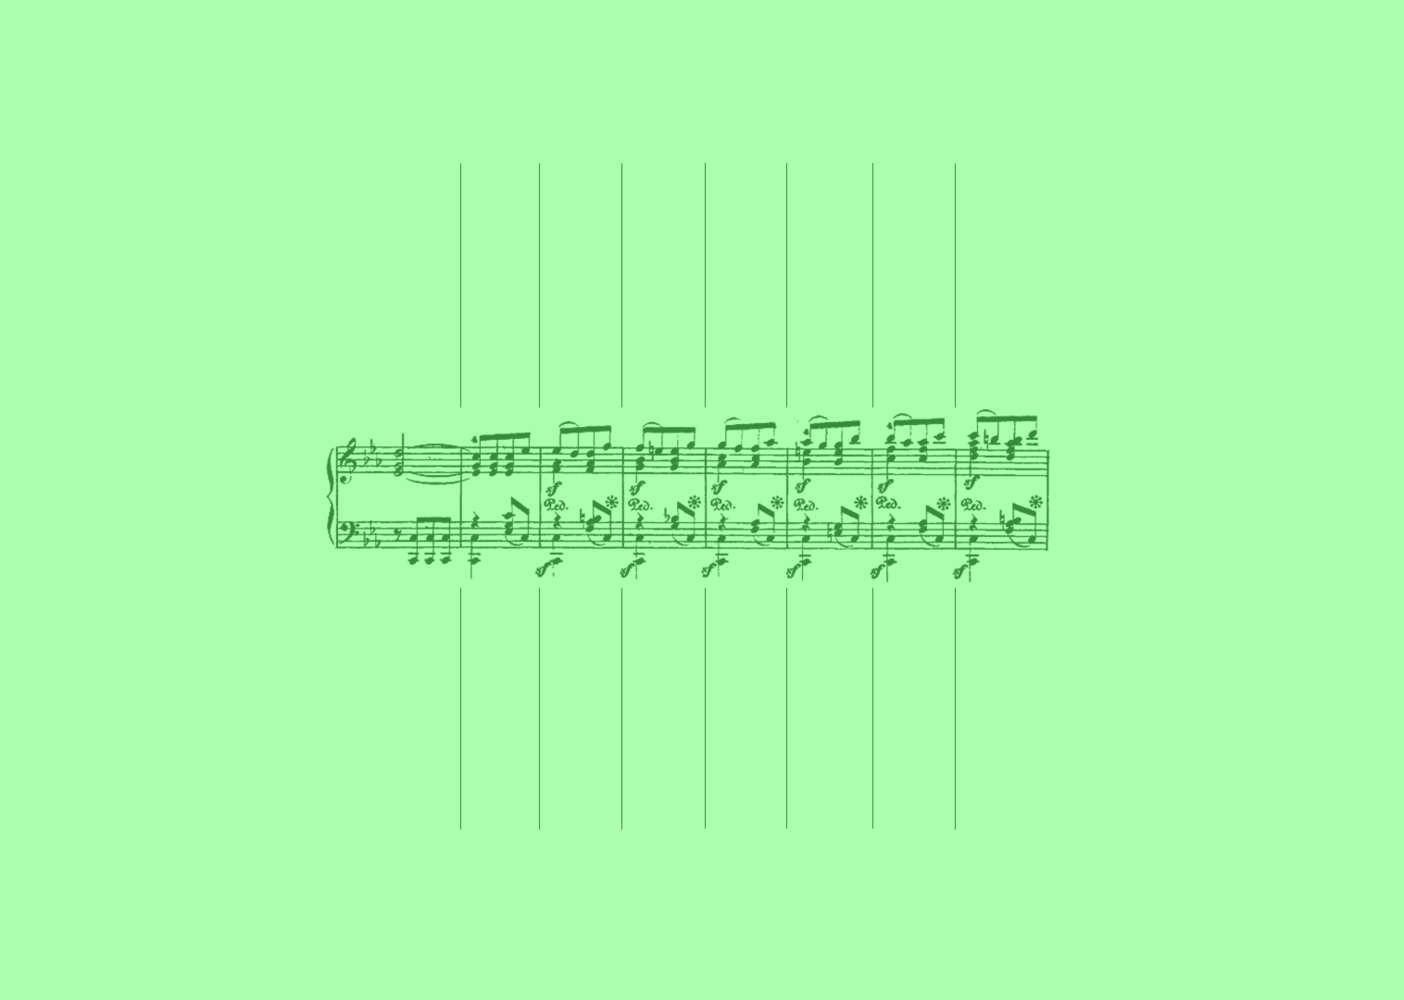 **concept**

terraced garden as ascending variations.
the composition is roughly illustrated by the 5th symphony, with a  repeated theme slightly variating from the beginning to the end.